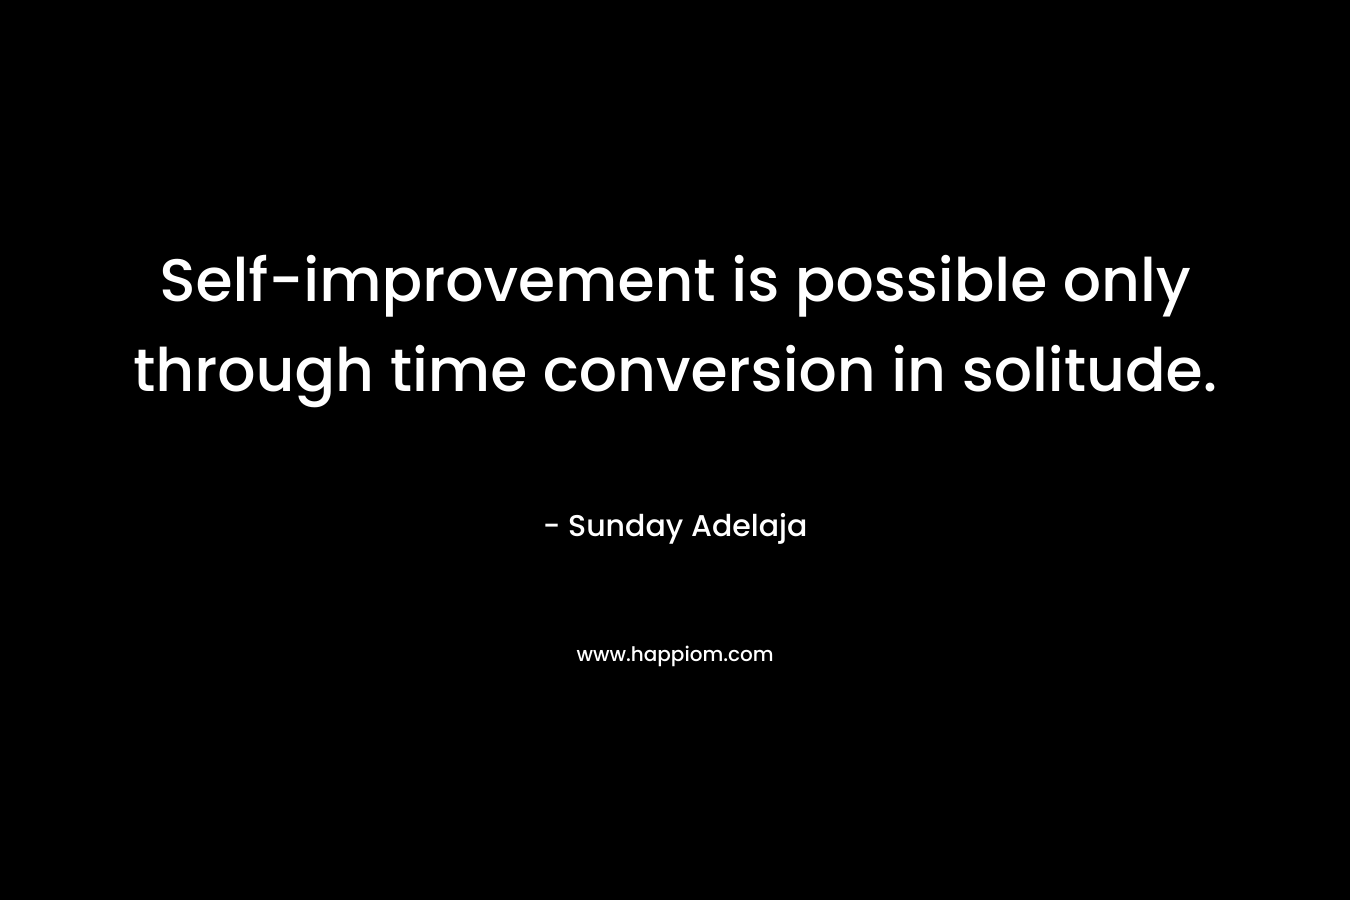 Self-improvement is possible only through time conversion in solitude.